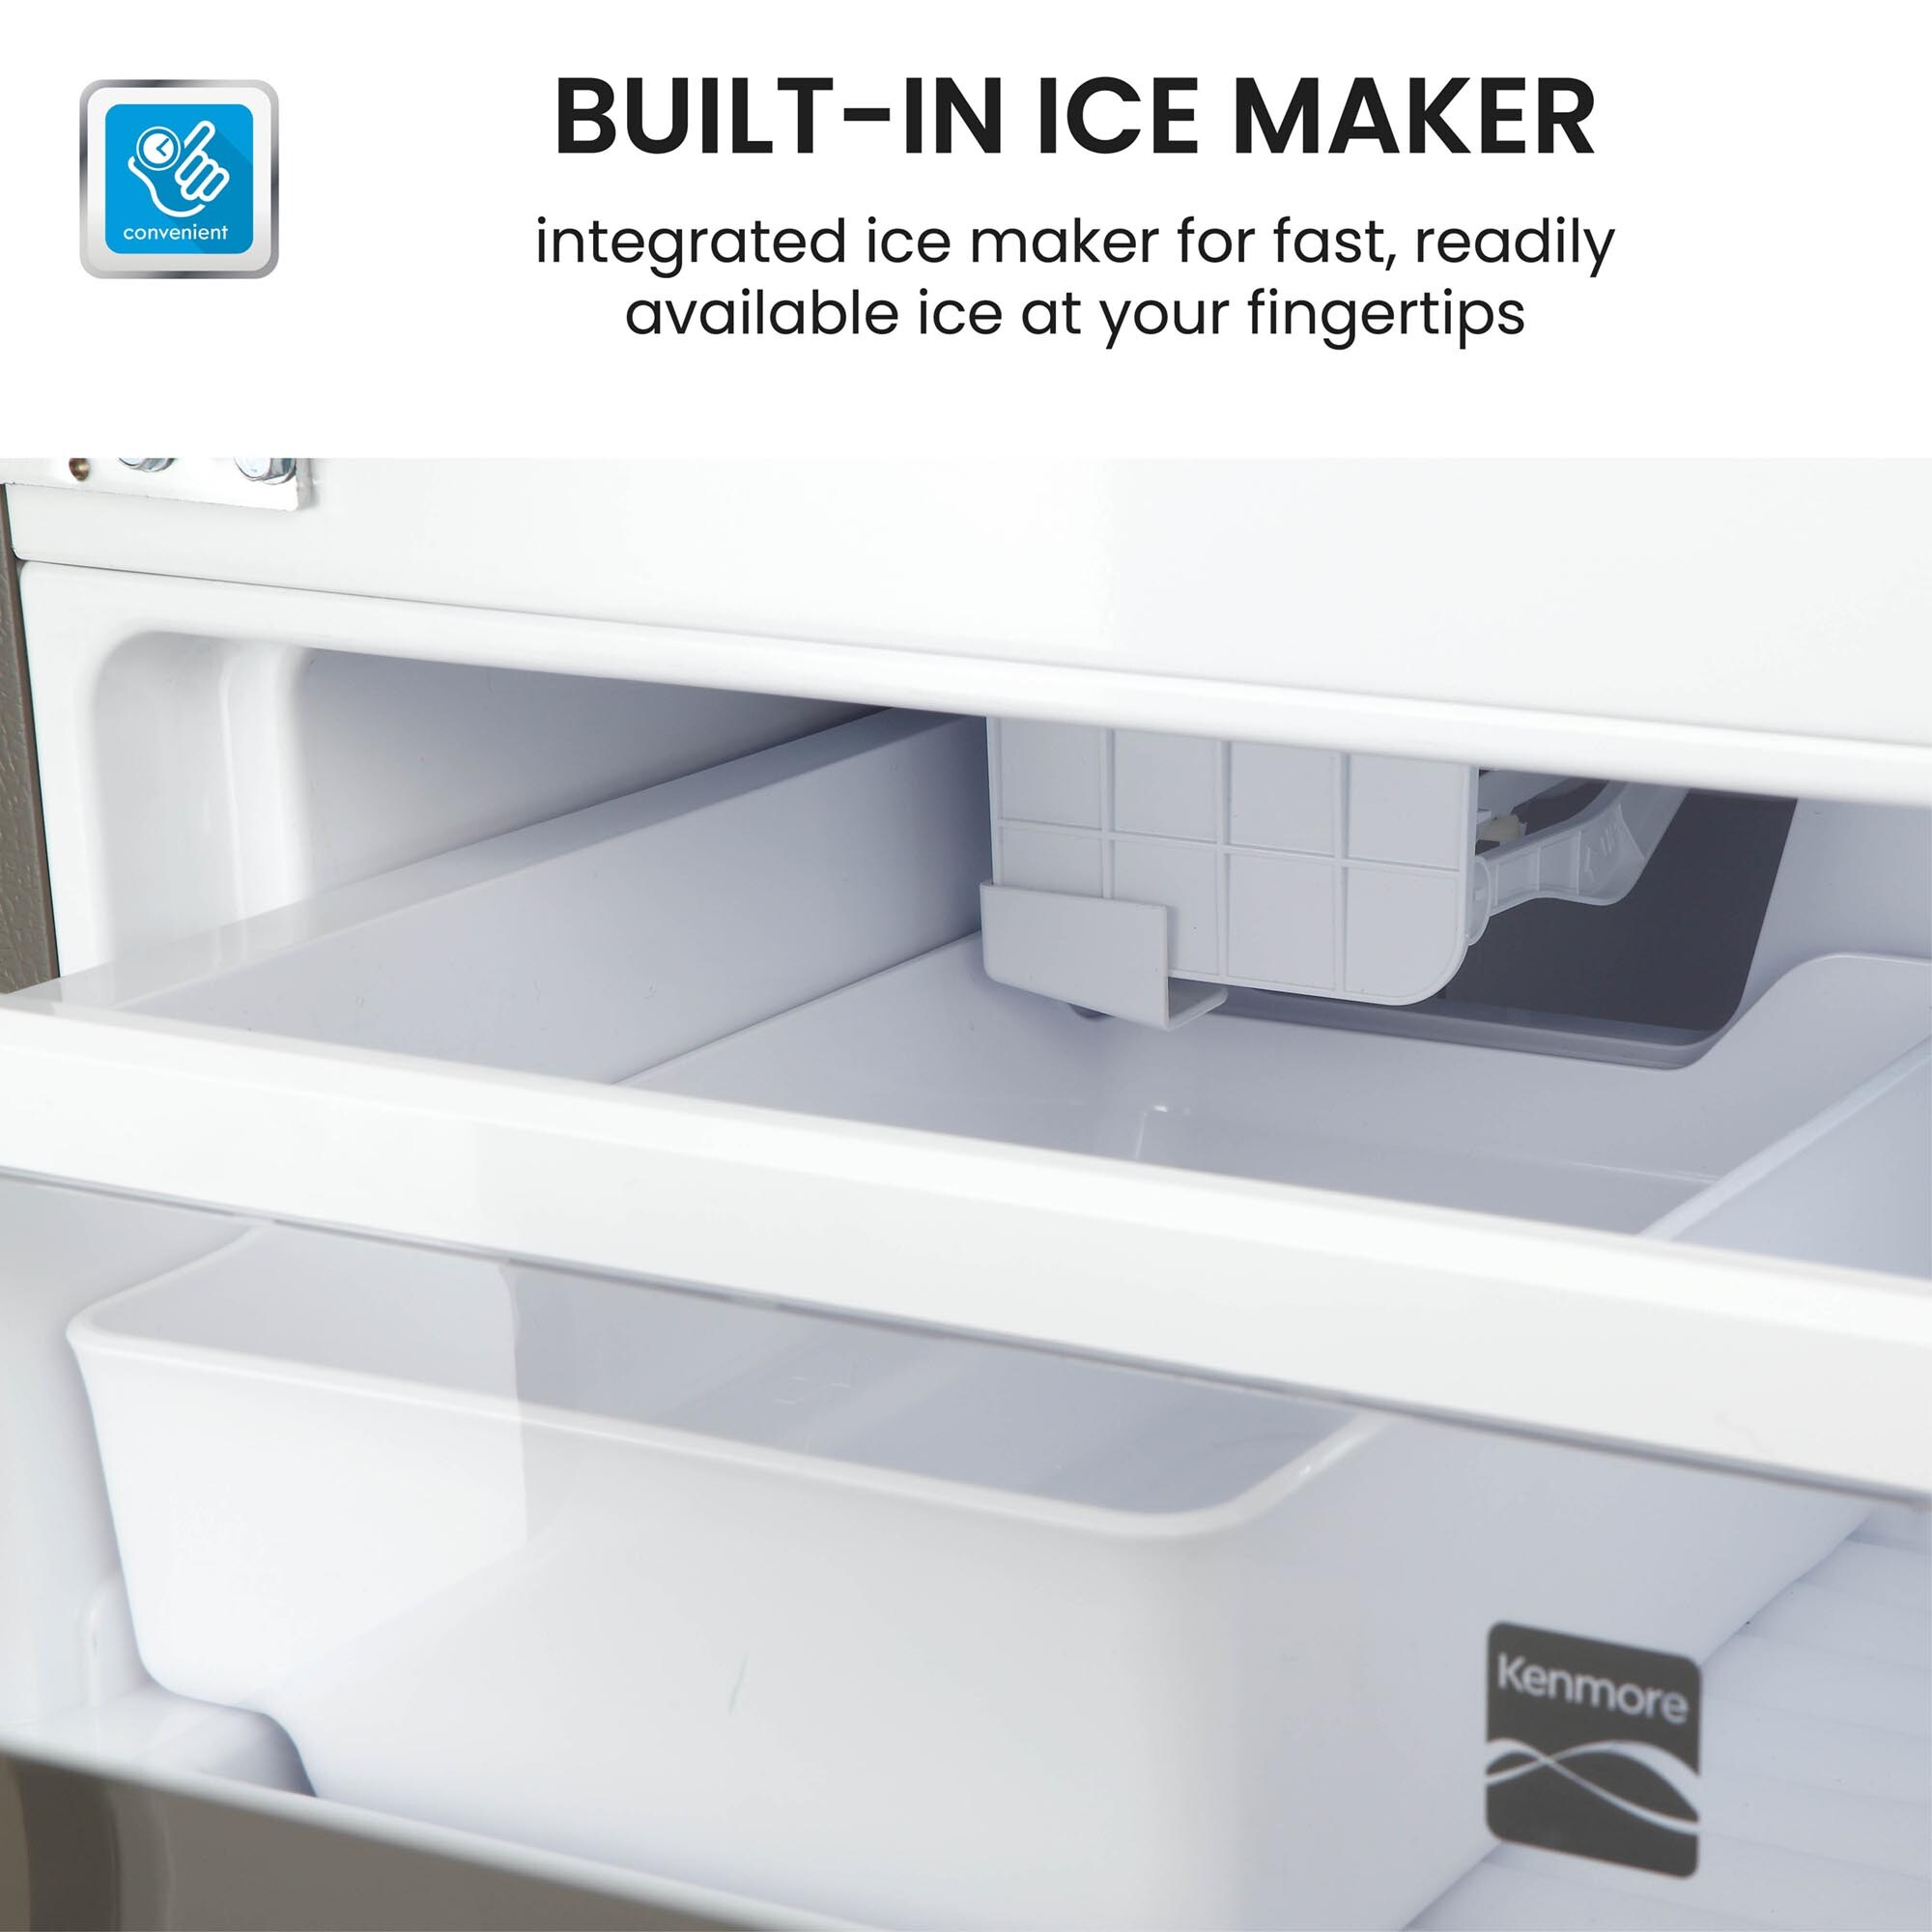 How to Replace the Light Fixture in a Kenmore Elite Refrigerator